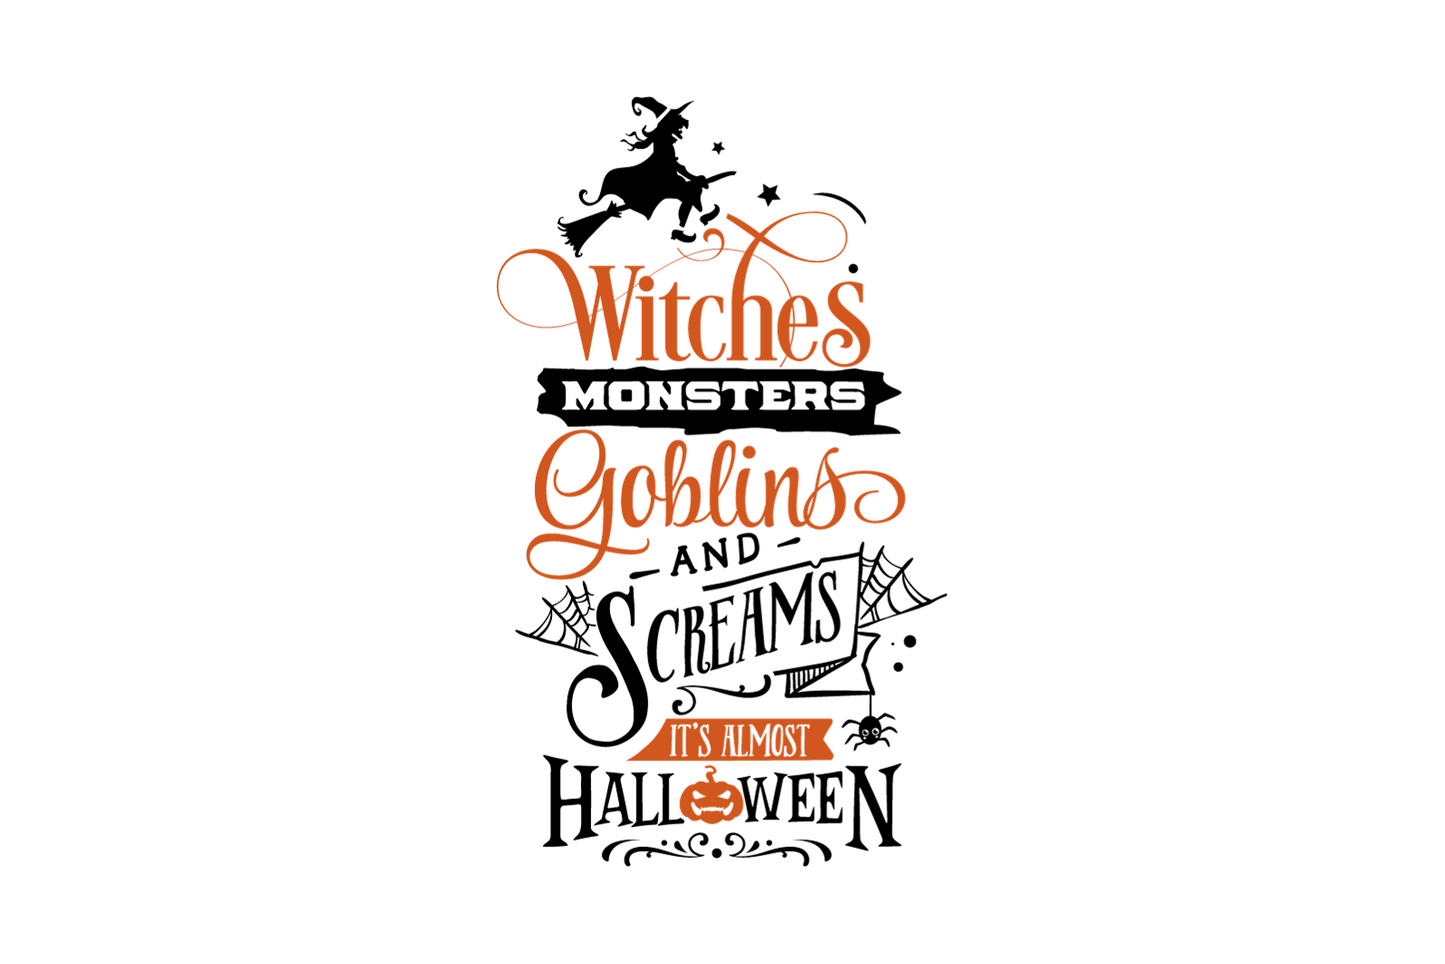 Witches, Monsters, Goblins and Screams. I'ts almost Halloween.